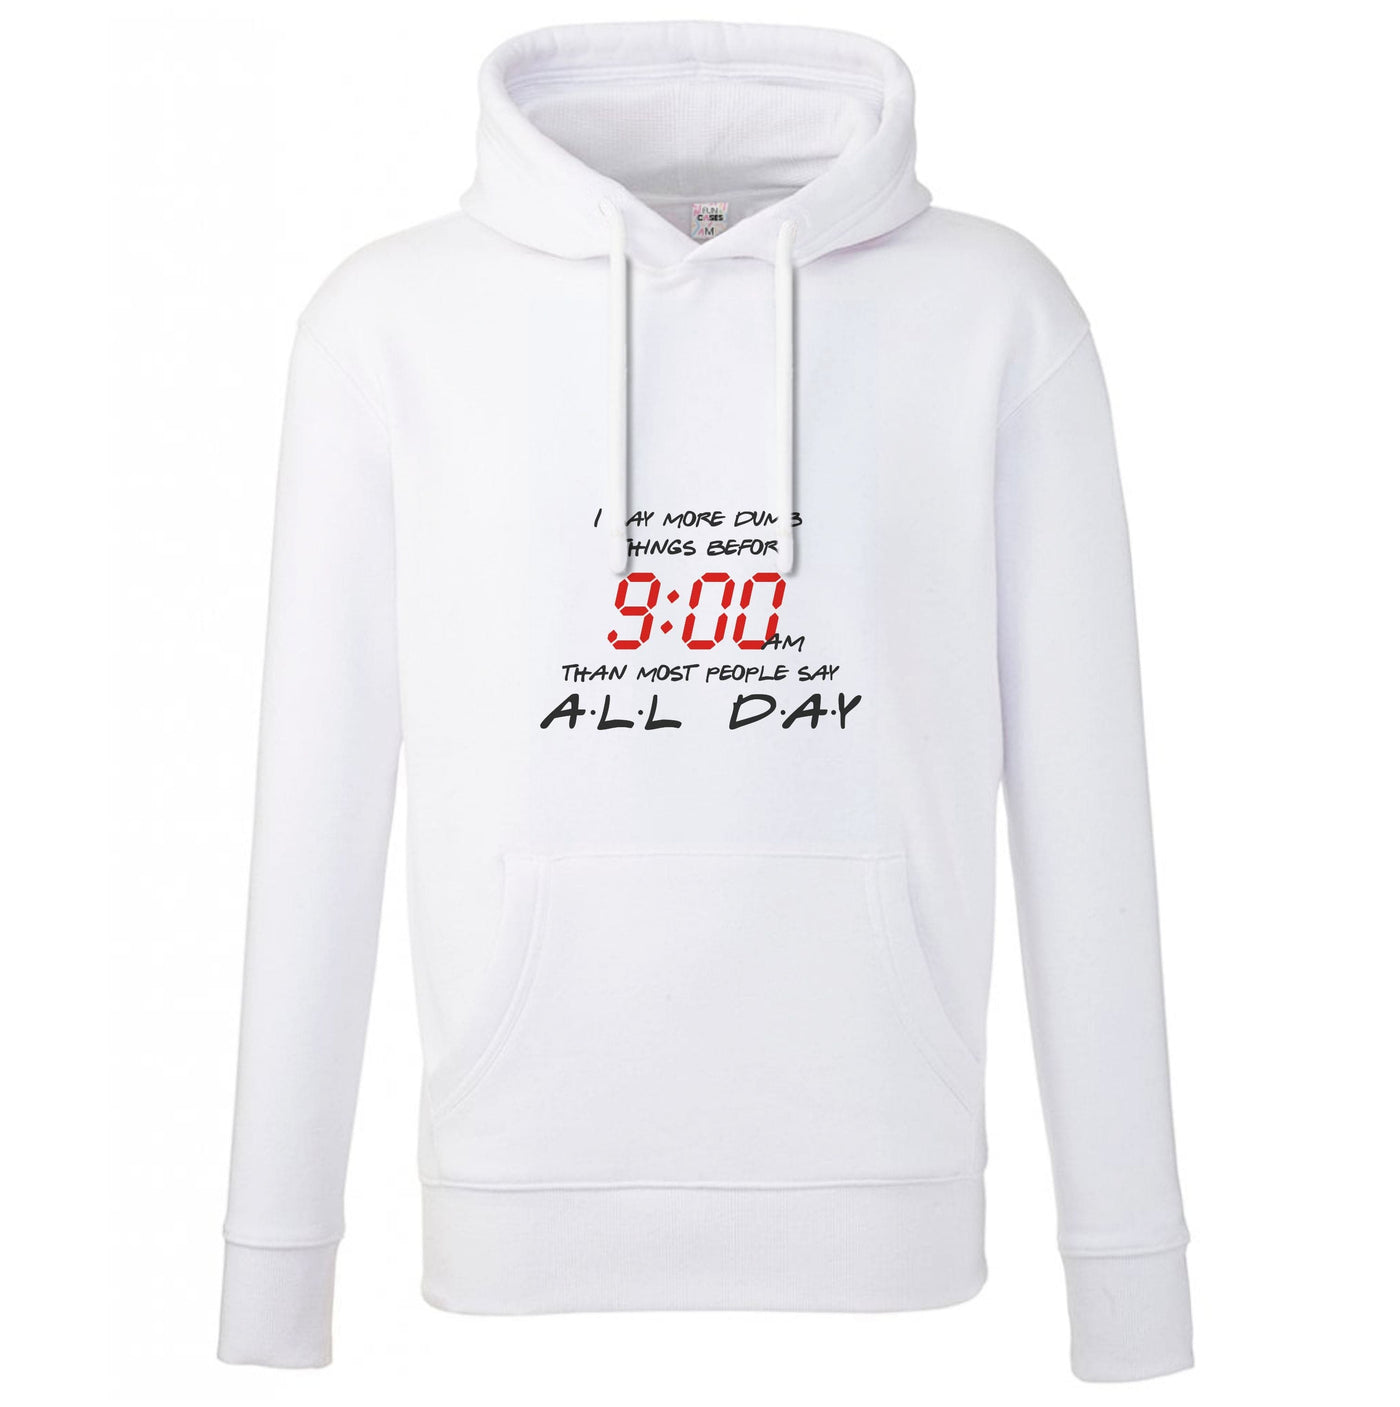 I Say More Dumb - TV Quotes Hoodie